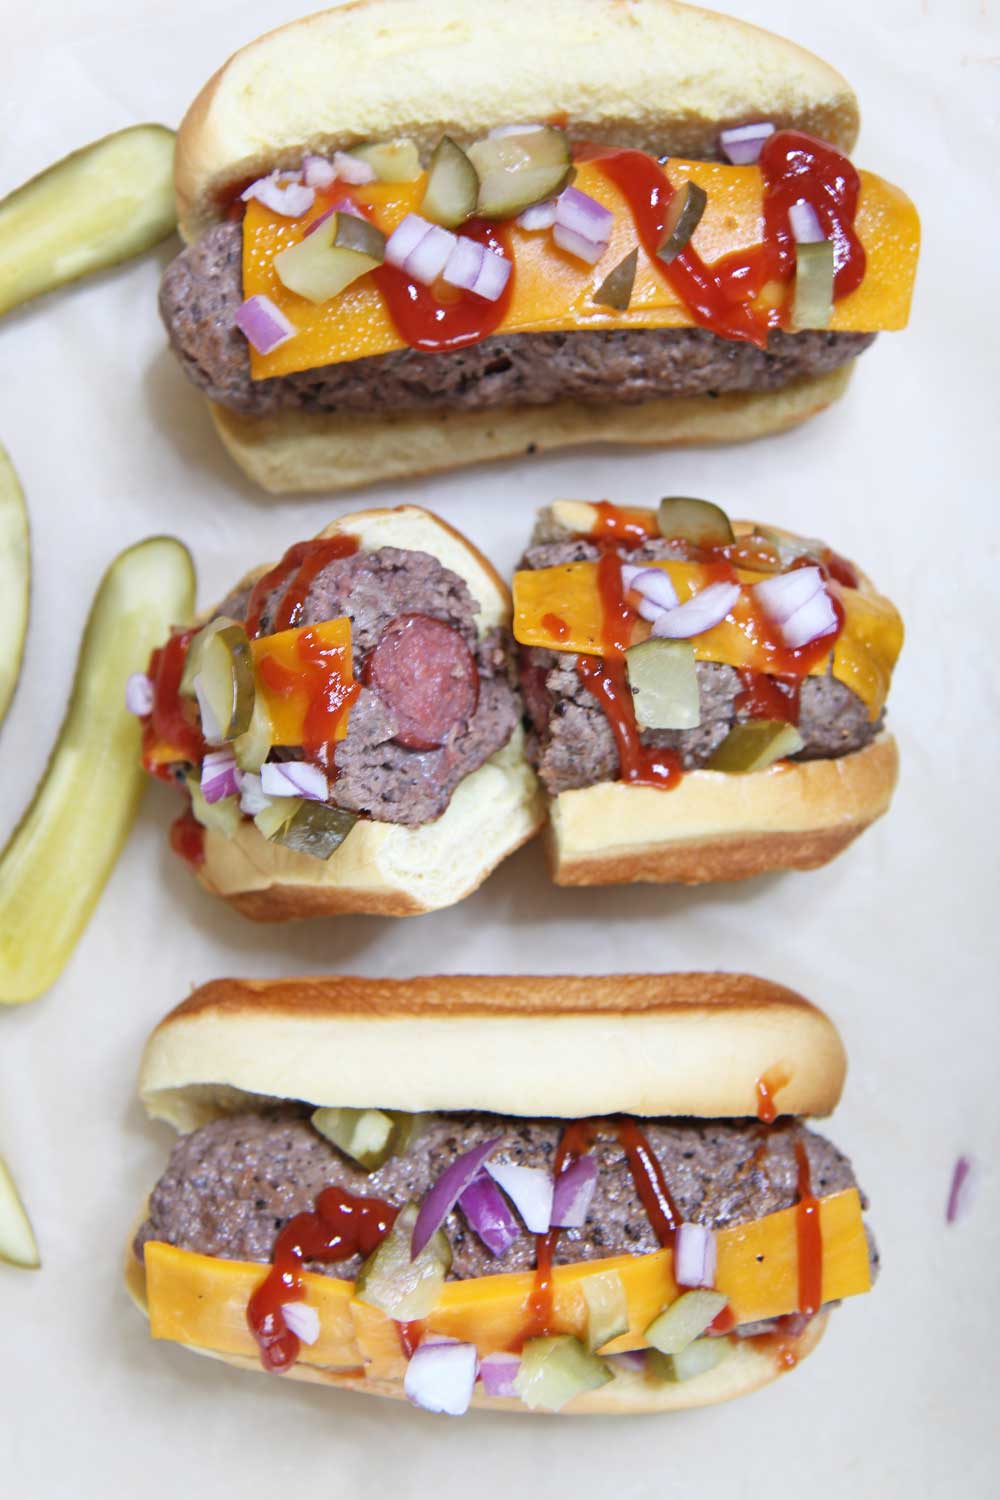 The Ultimate Burger Dog Food Hack. No more deciding weather to grill a hot dog or hamburger. This is a stuffed burger with a hot dog in the middle. Happy Grilling! #hotdog #foodhack